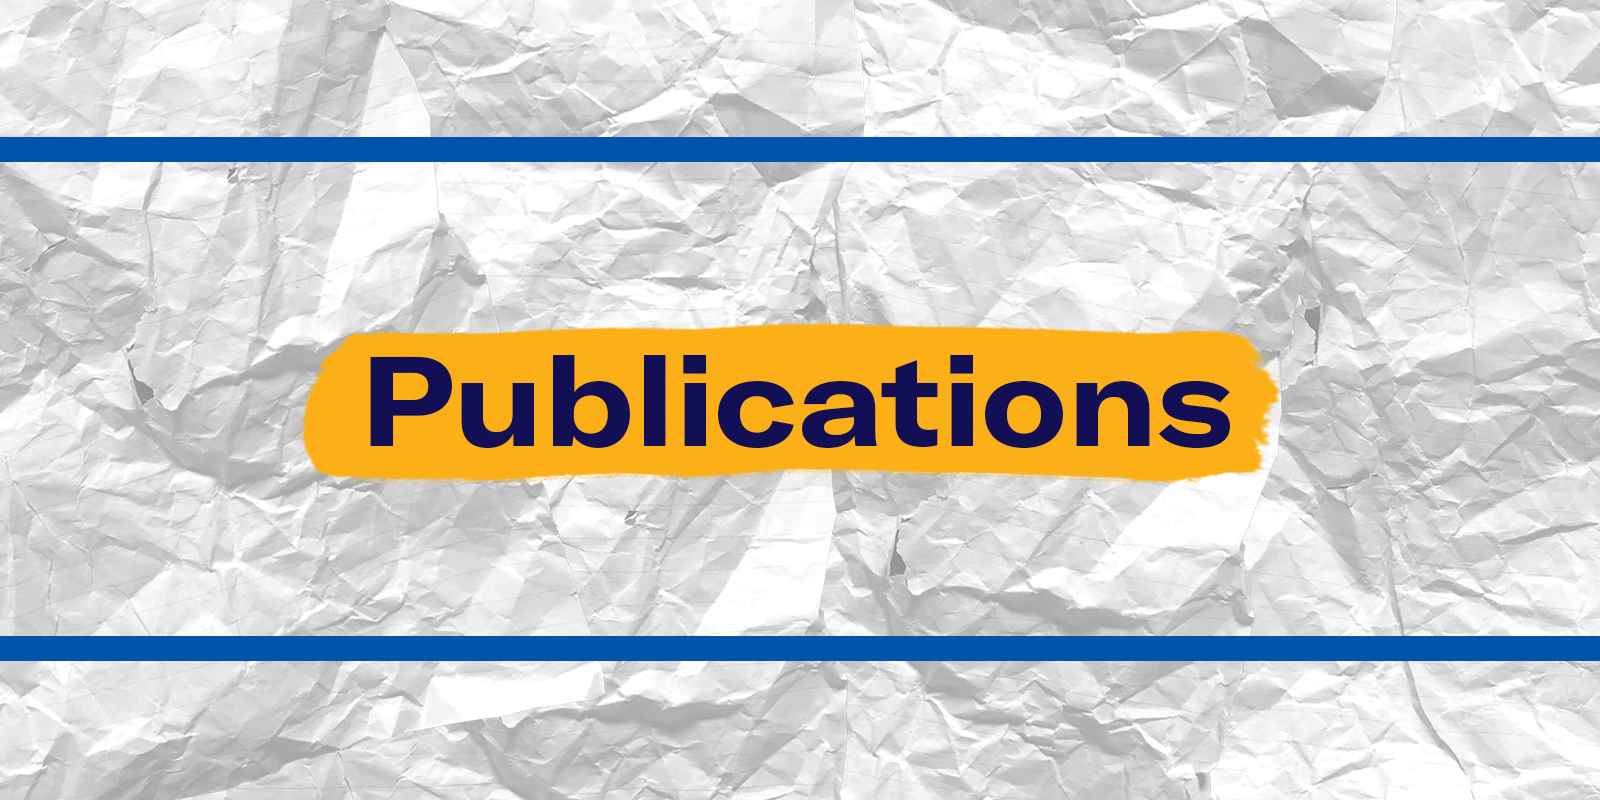 The word 'Publications' in navy font, with small blue rectangles above and below, on a background of crumpled and wrinkled notebook paper